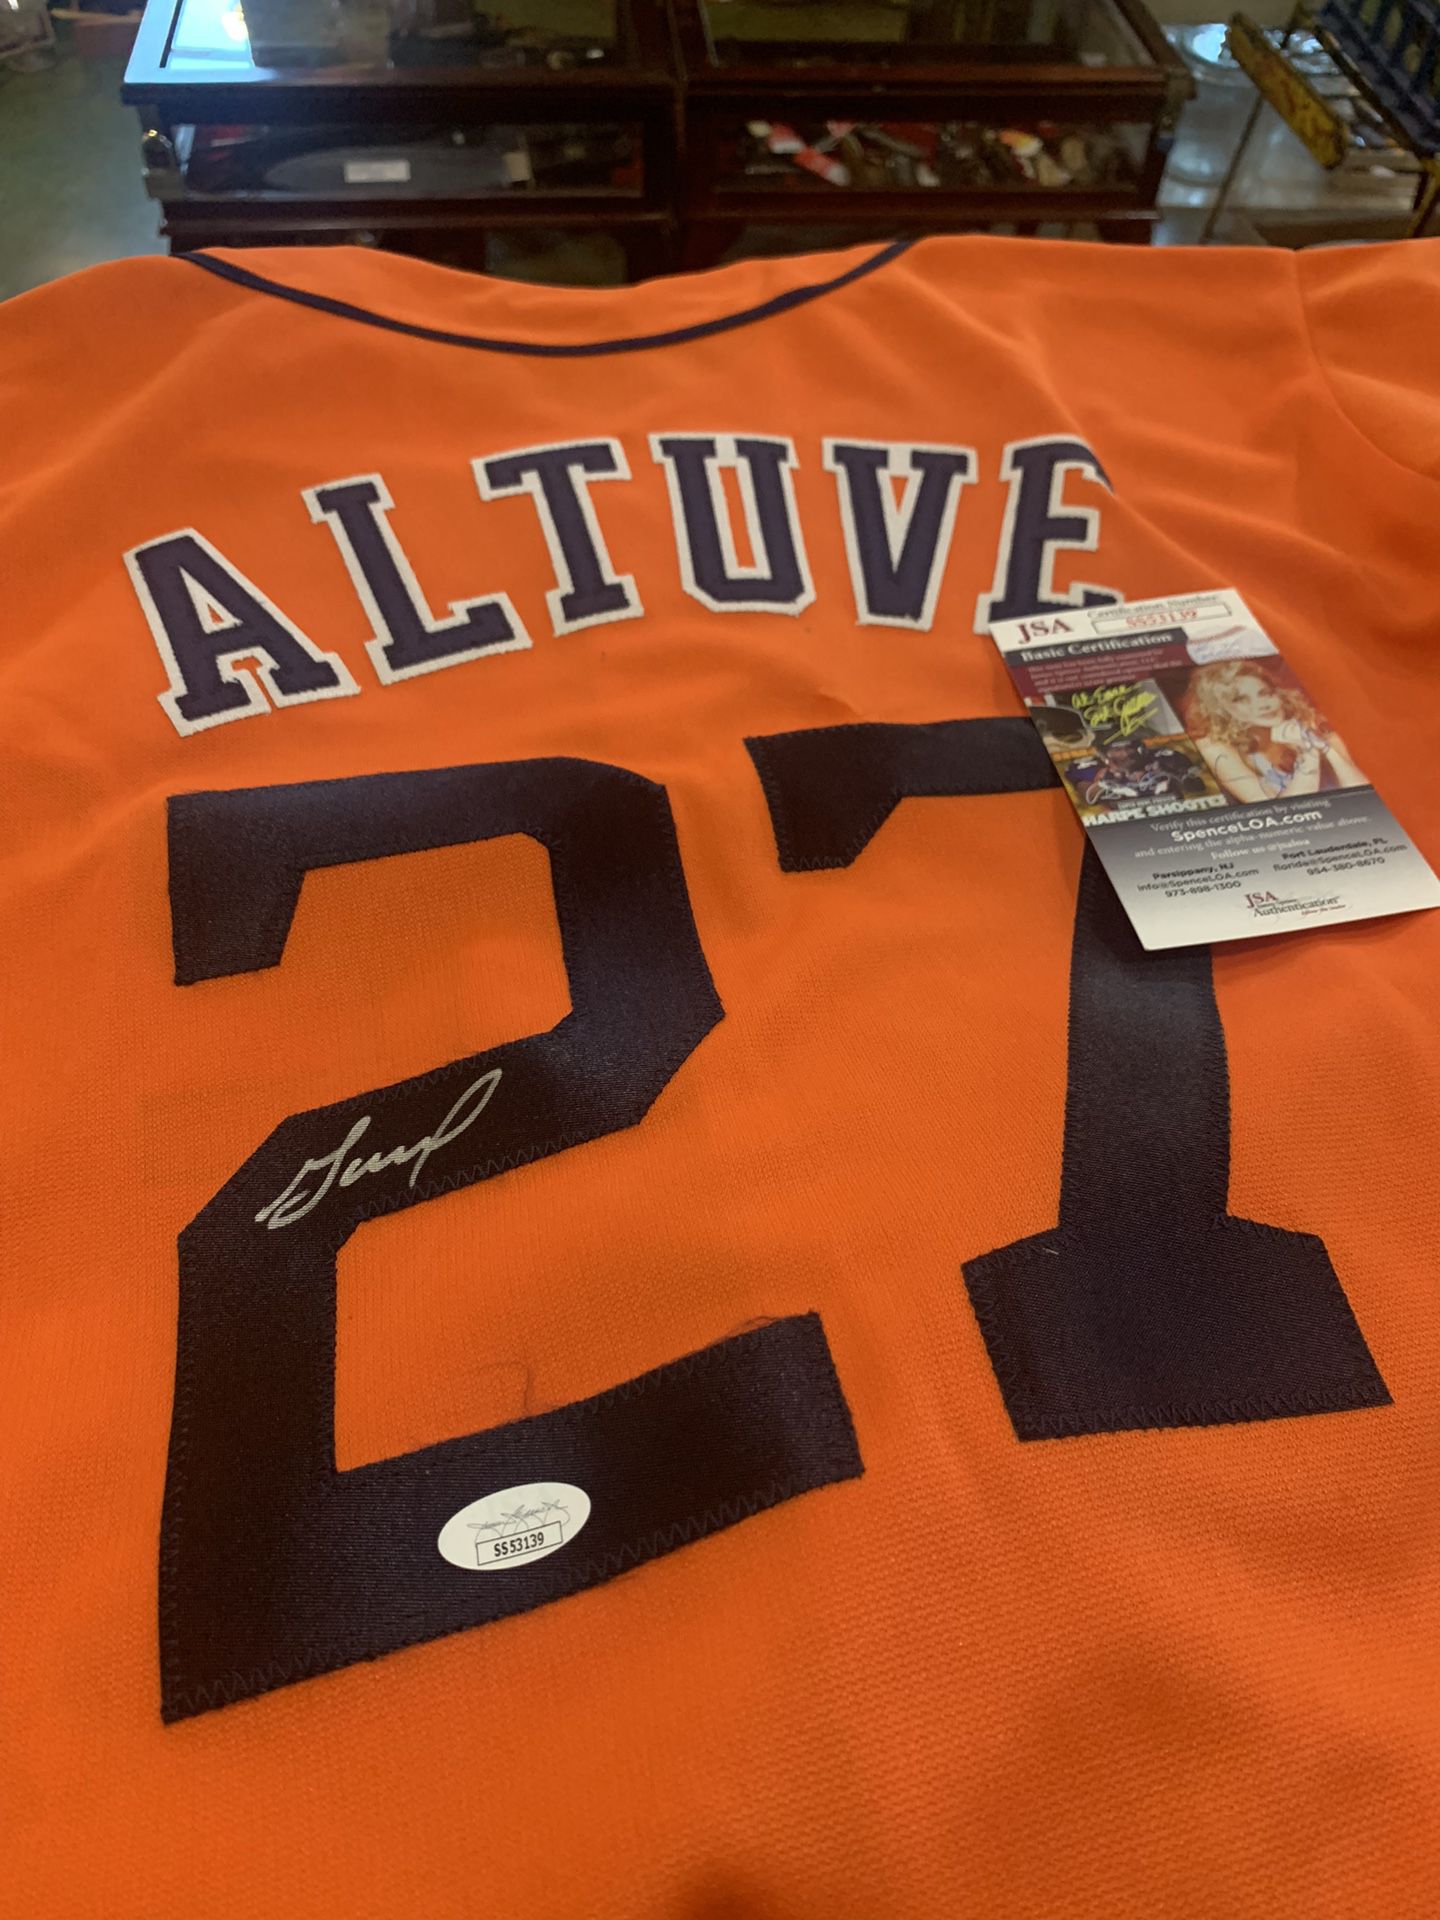 ALTUVE  Astros signed Jersey with C.O.A.  Great Christmas gift!  285.00.  Johanna at Antiques and More. Located at 316b Main Street Buda. Antiques vin